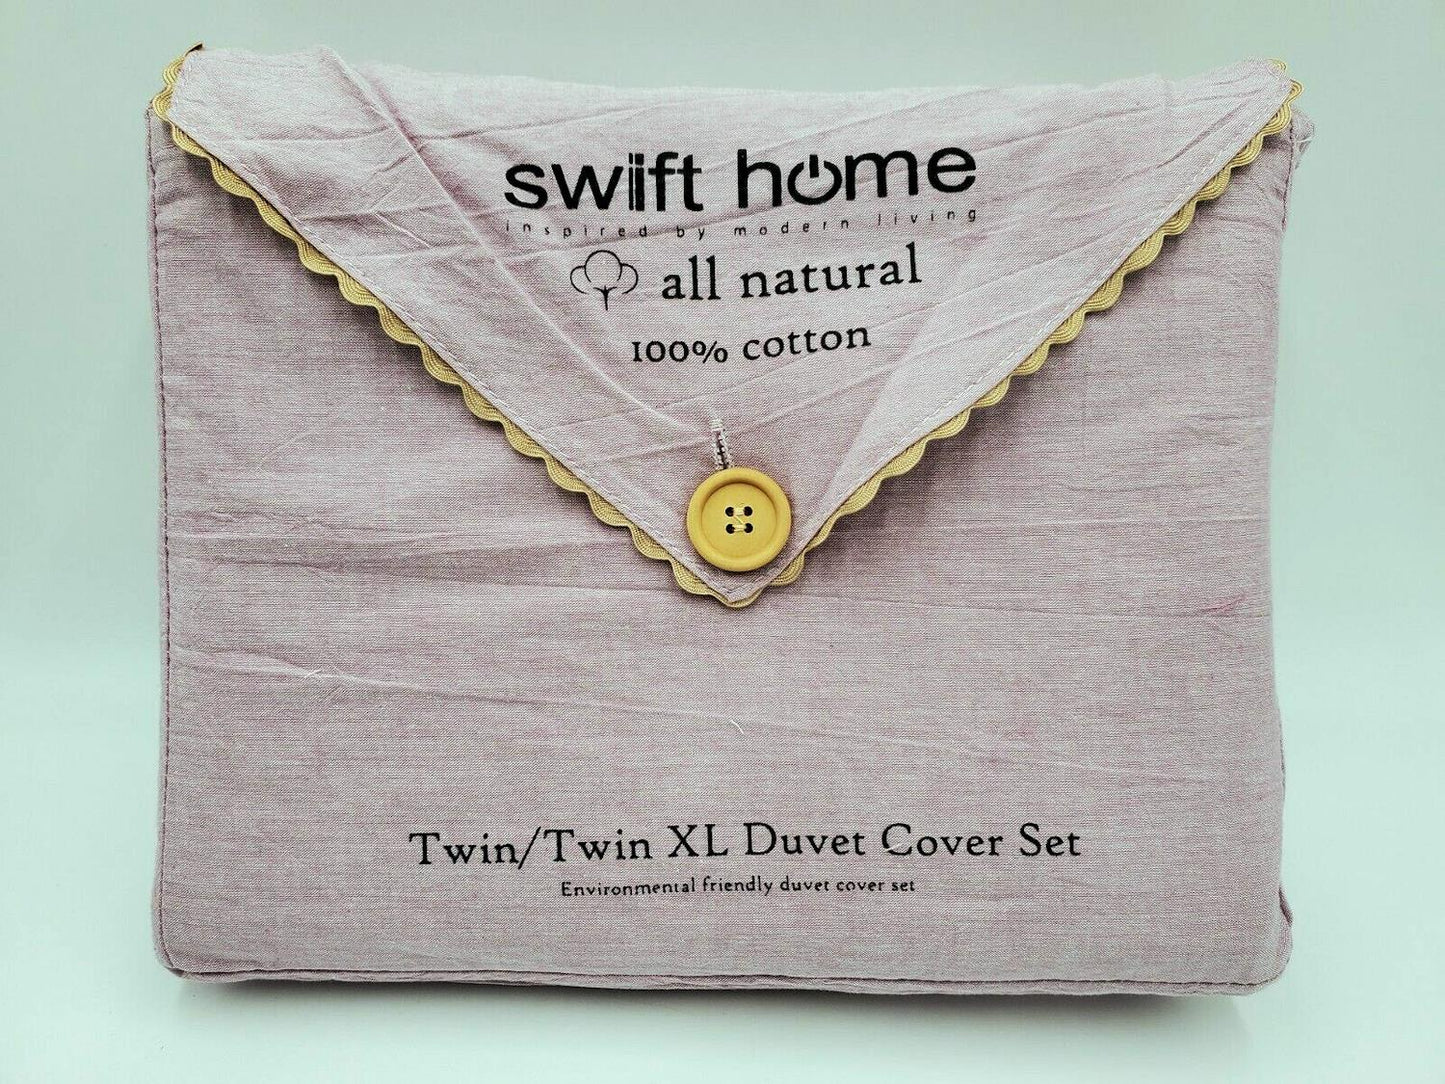 Swift Home Pre-Washed Cotton Chambray Duvet Cover and Sham Bedding Set Dusty Lavender Twin Twin XL